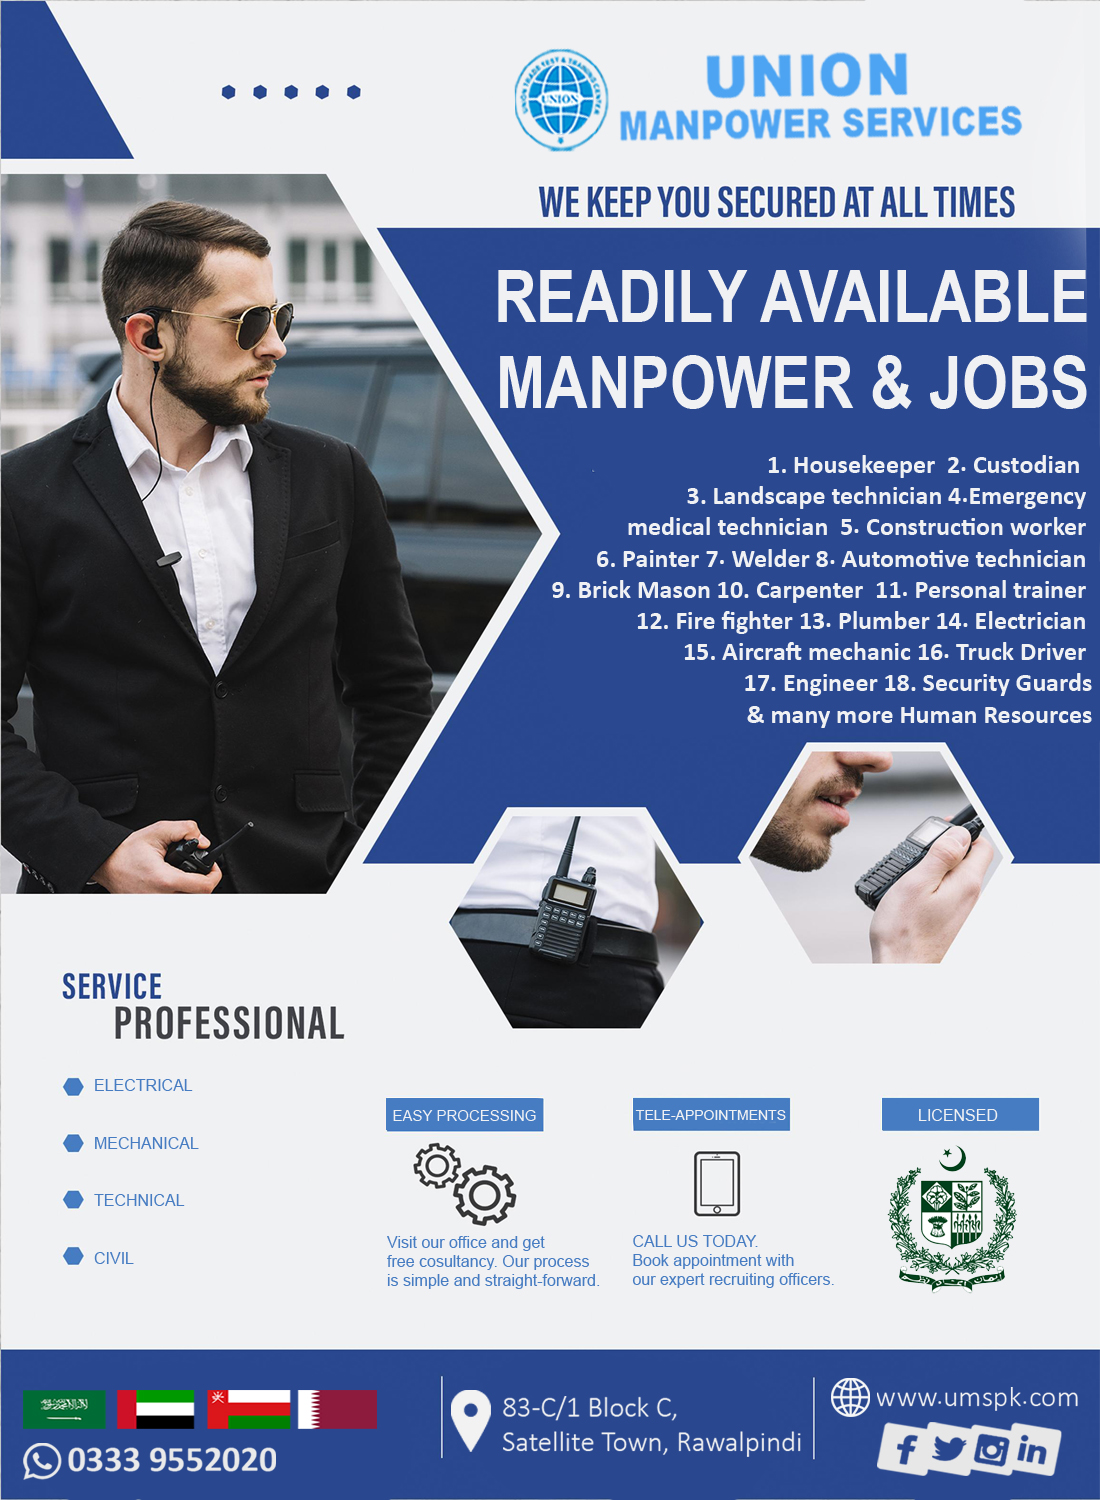 Union Manpower Services is one of the best overseas employment Agencies in Rawalpindi. Union Manpower Services works with many trades.